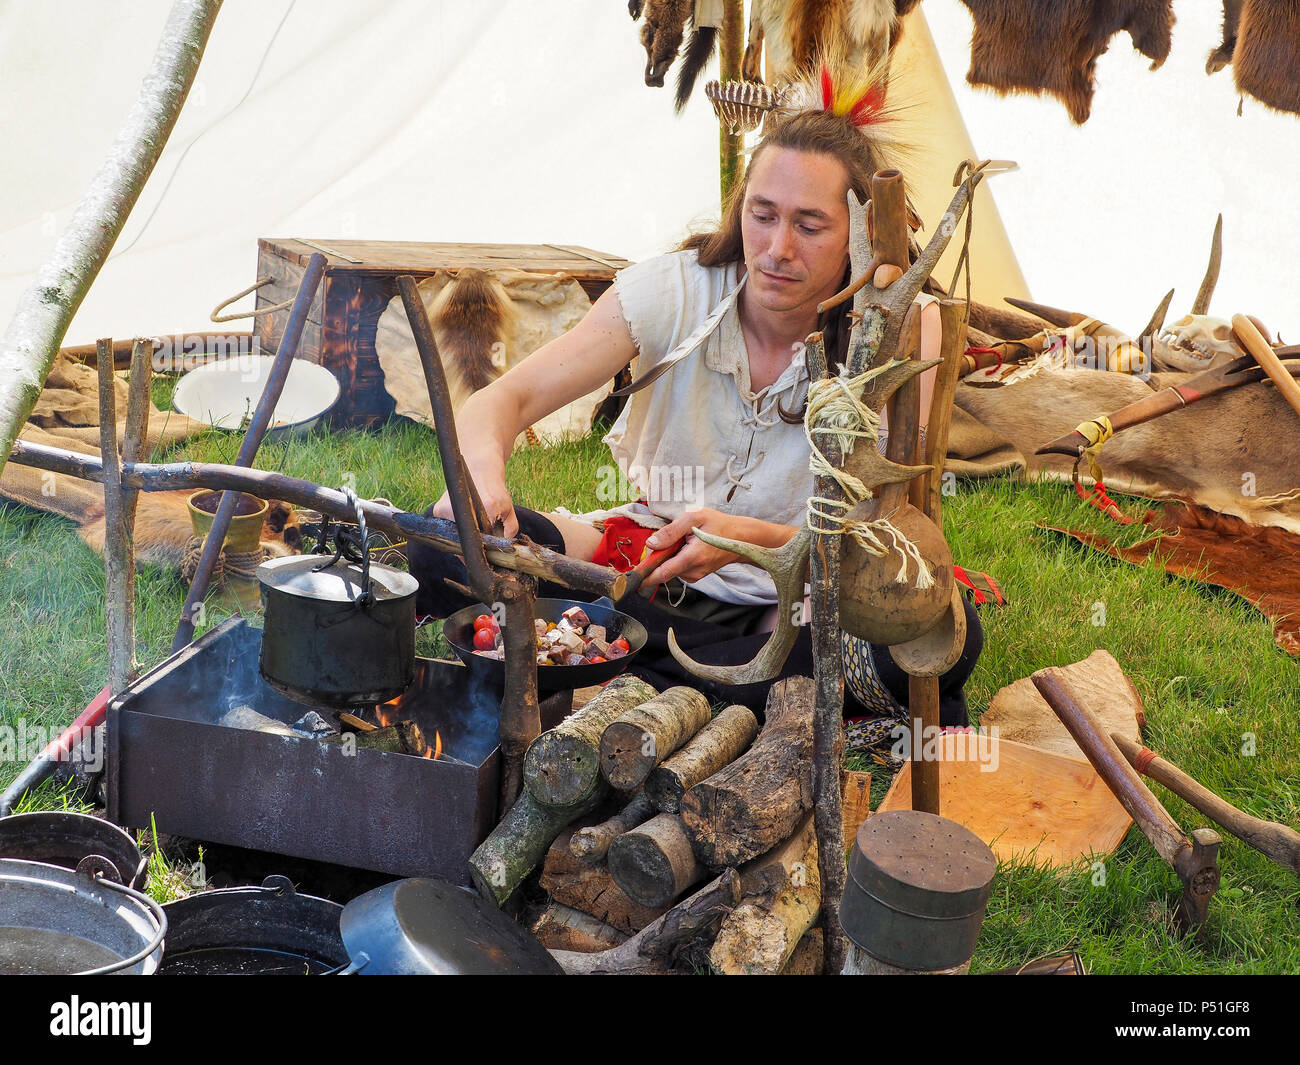 Documentary editorial image. ELBEUF, FRANCE - JUNE 9, 2018. An unidentified man dressed like indian from america is cooking the lunch on the fire wood Stock Photo